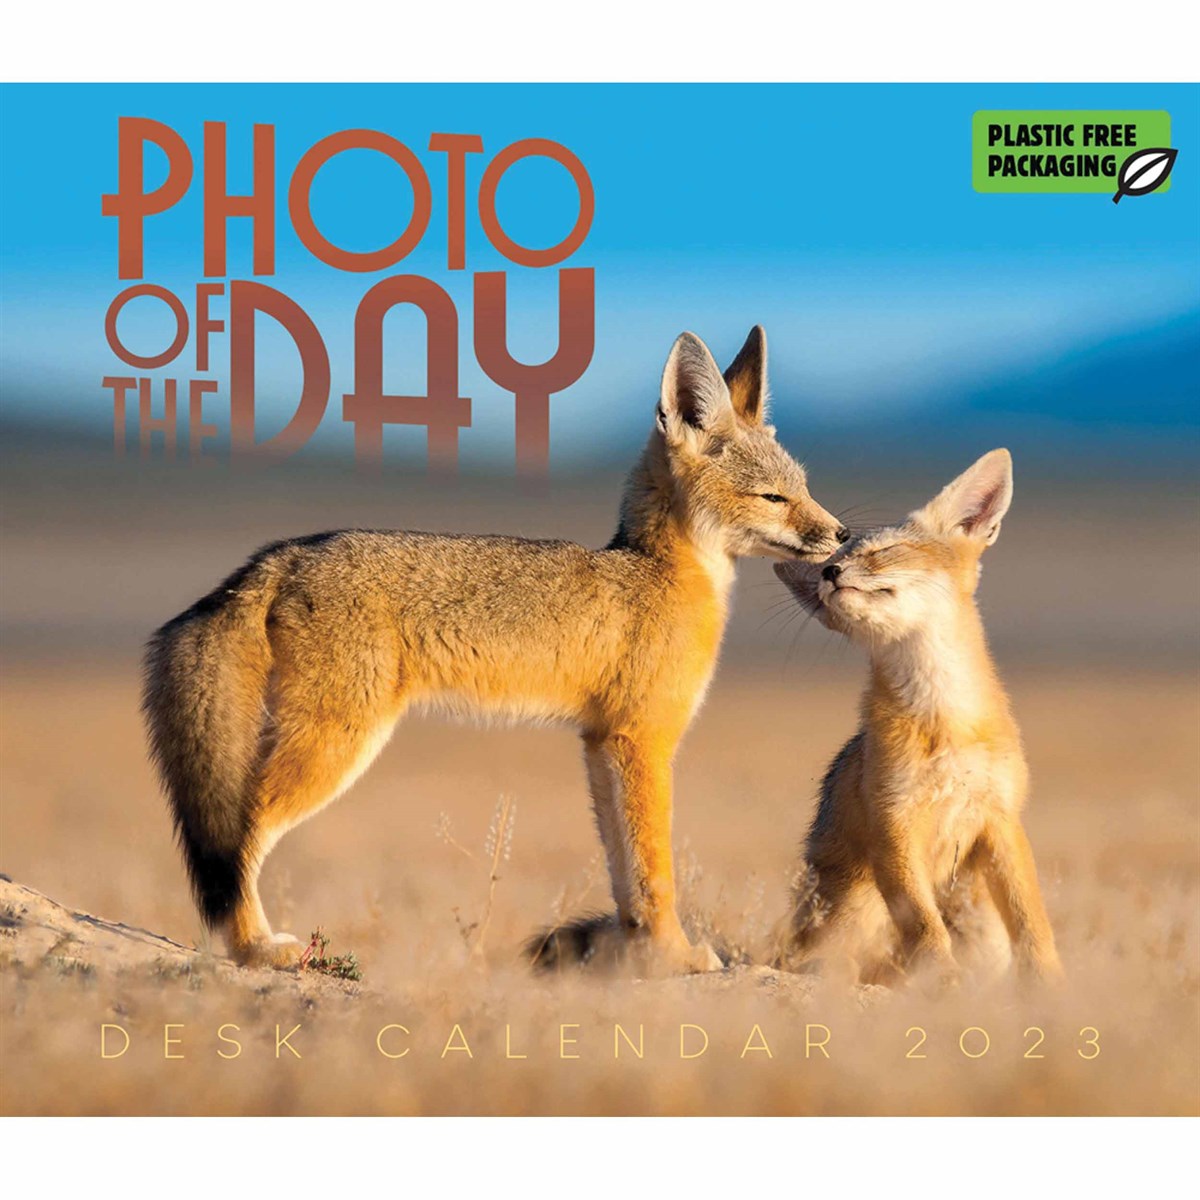 Photo Of The Day Desk 2023 Calendars